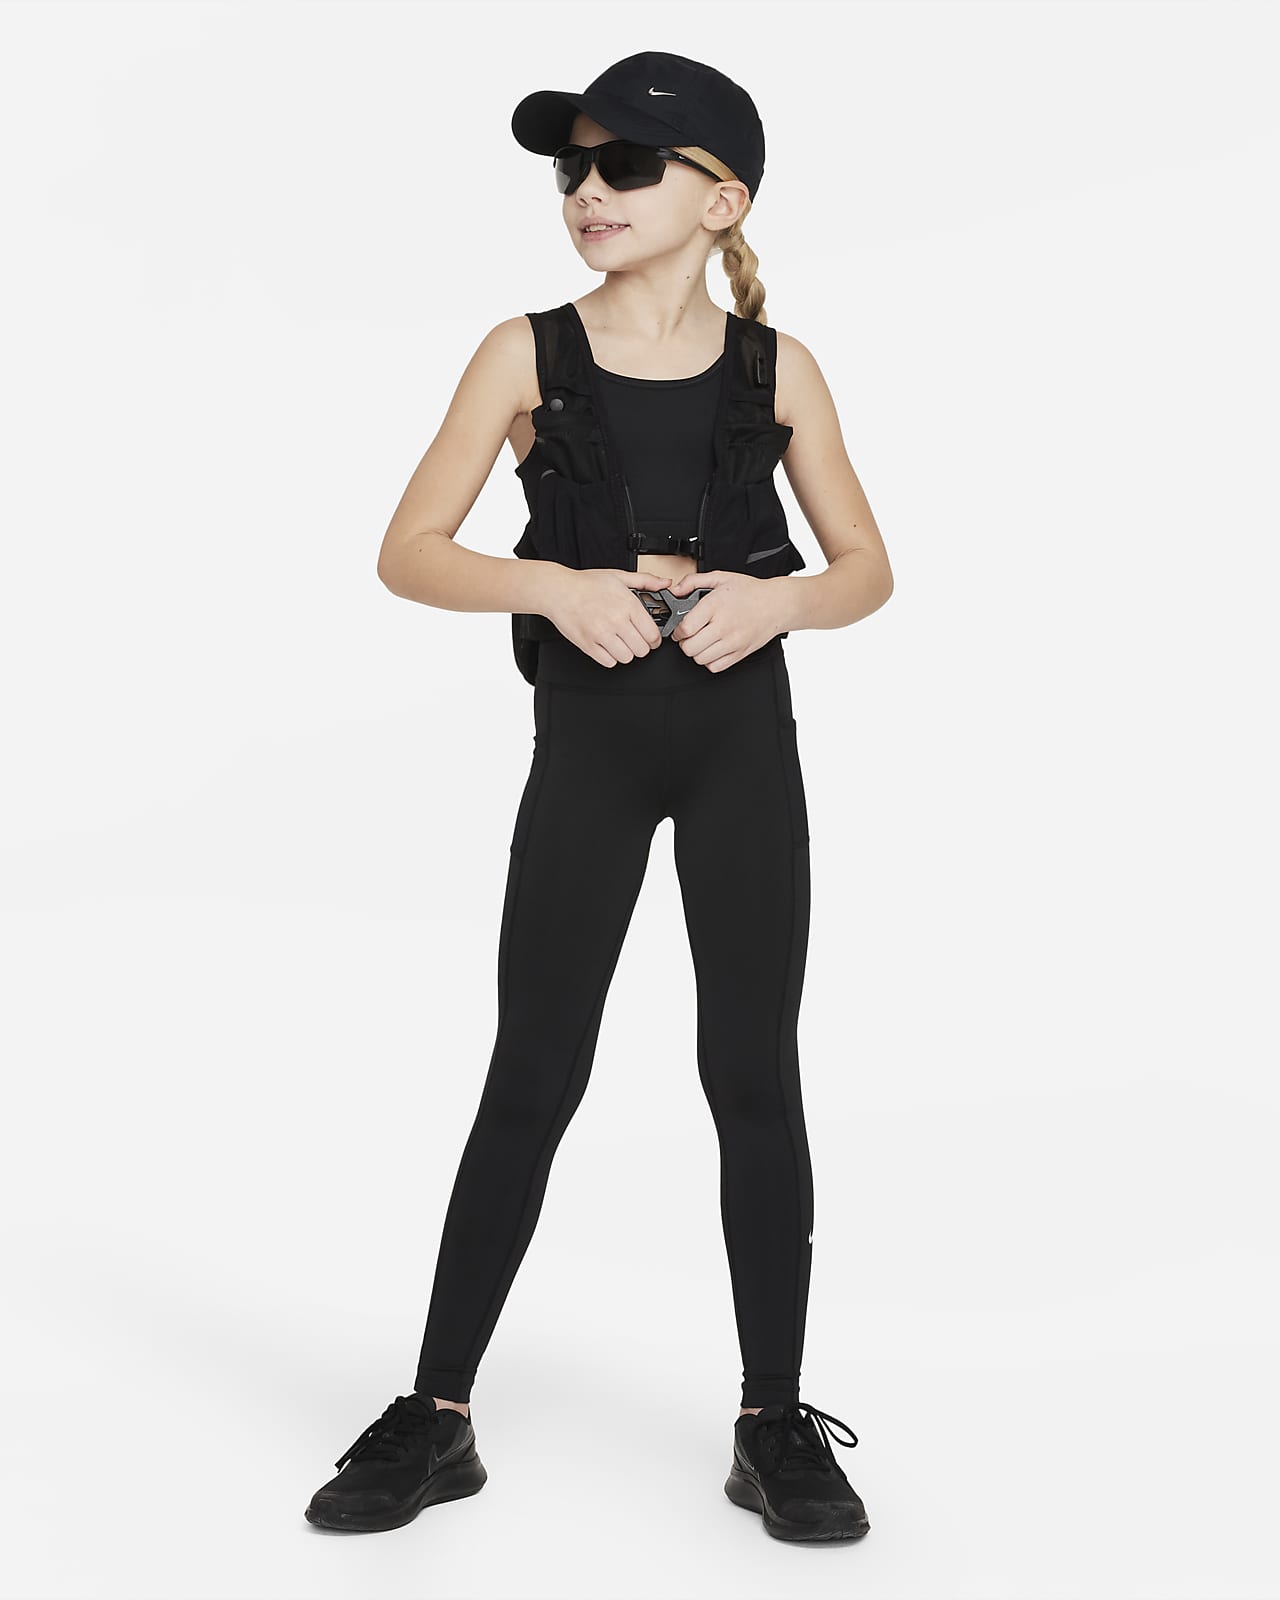 Solid Black Leggings With Or Without POCKETS!! Multiple Sizes From Kids to  Diva!